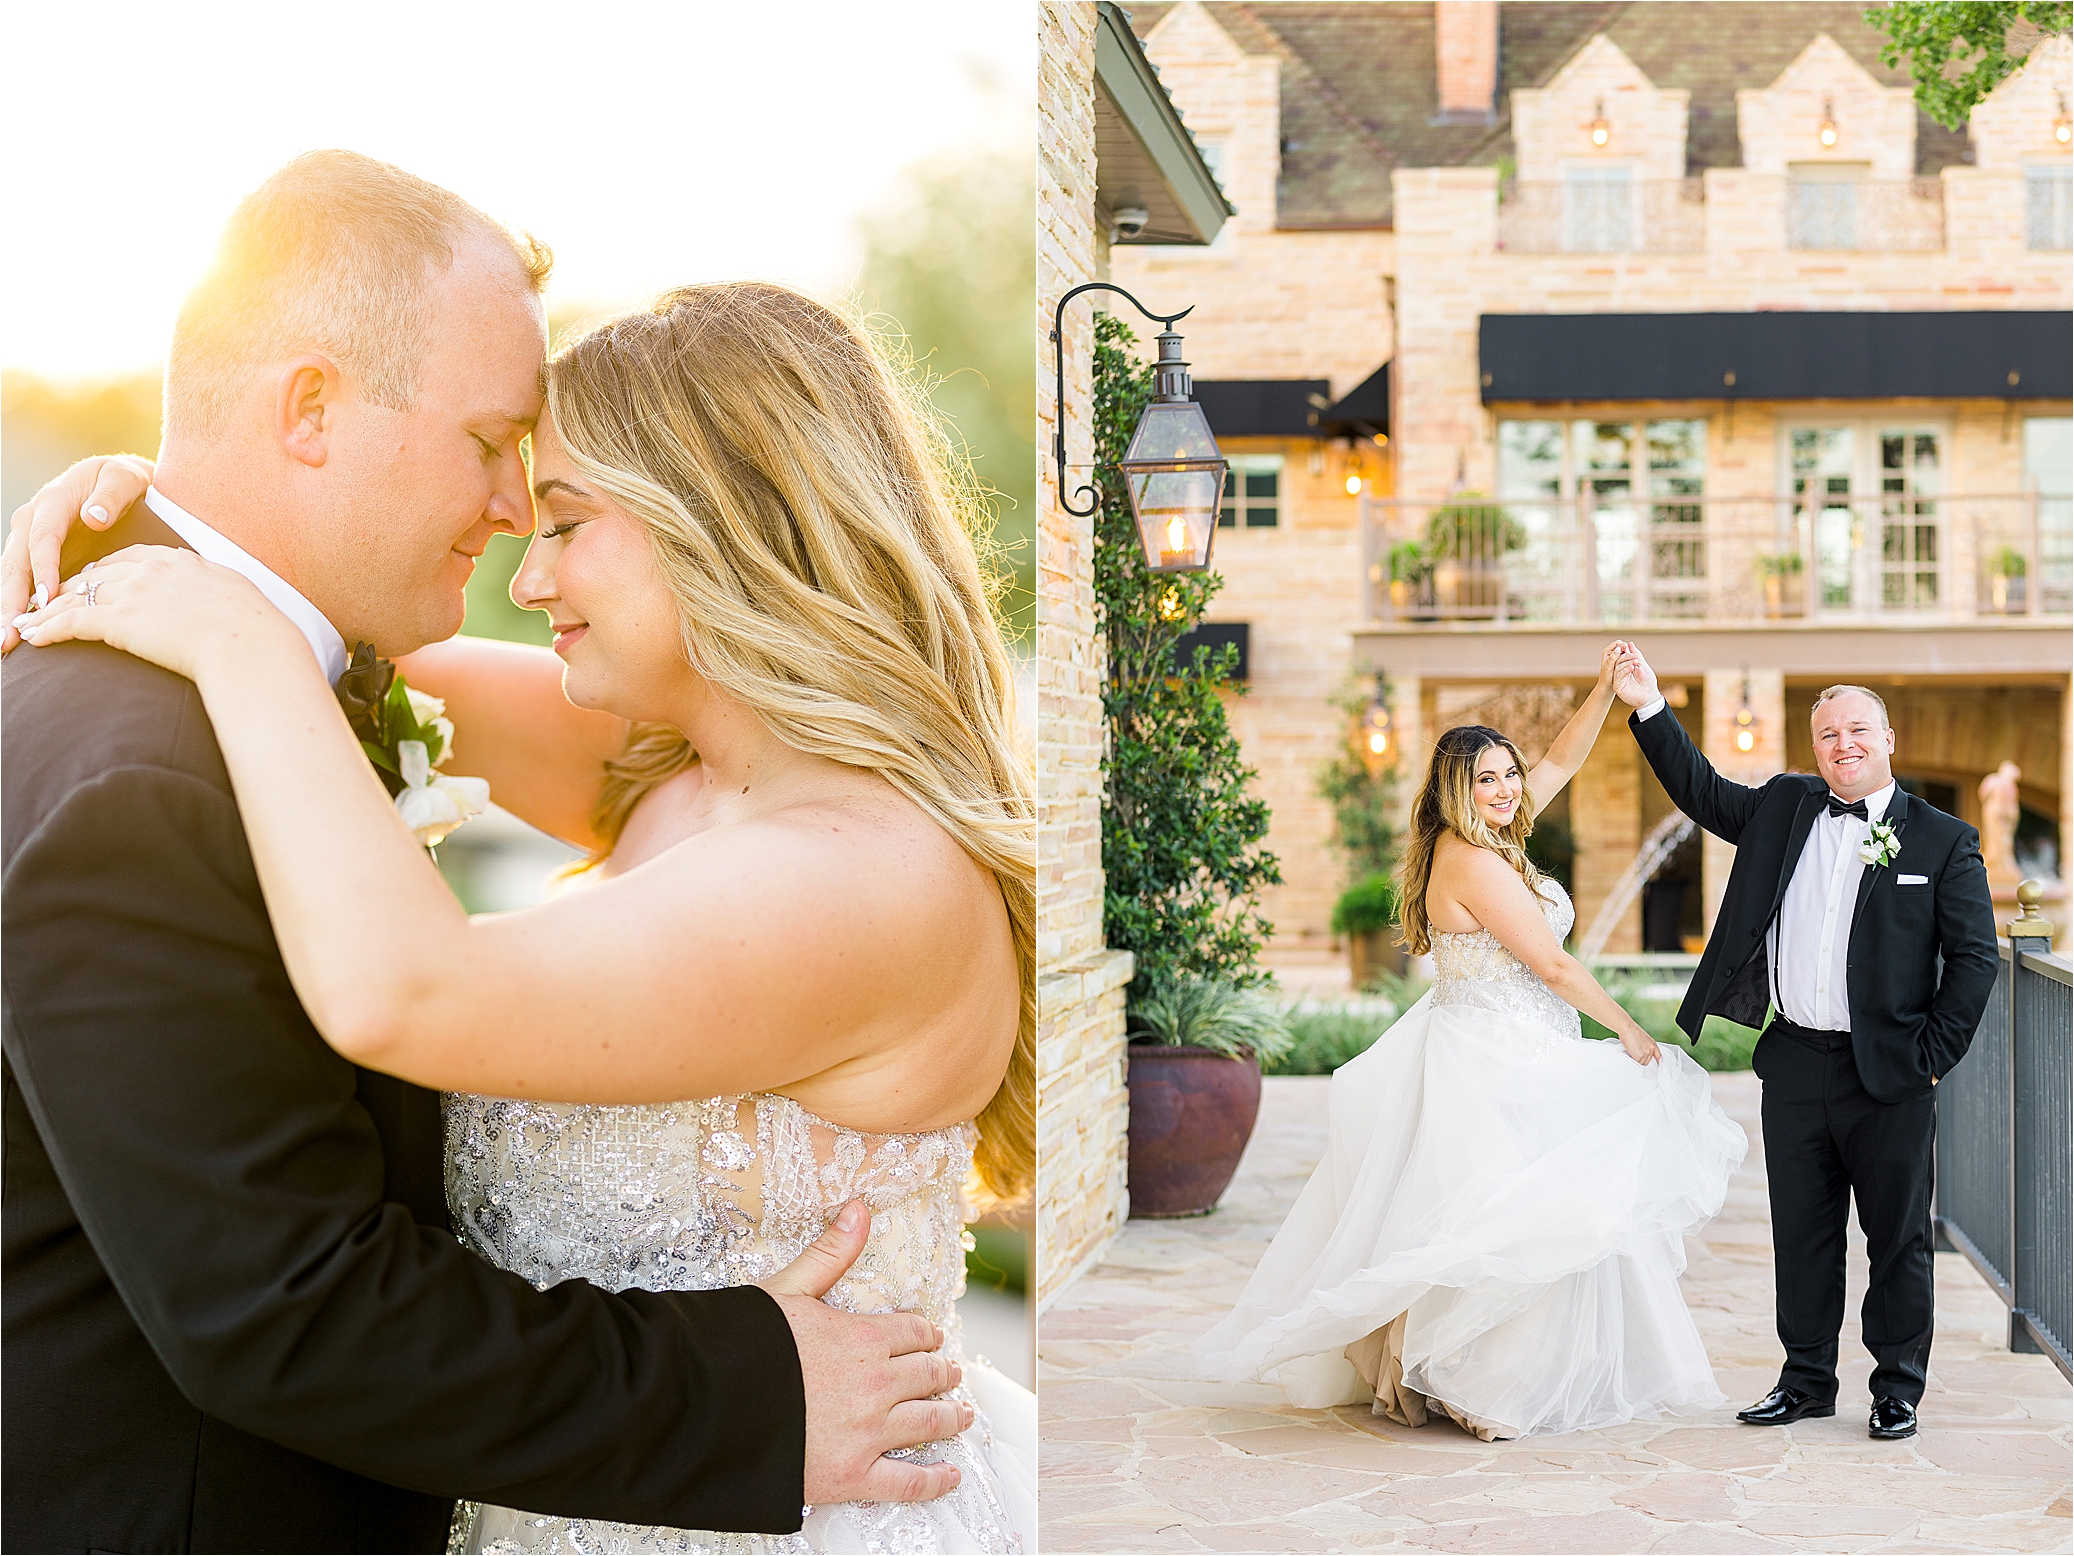 A newlywed couple embraces in front of sunset at The Redberry Estate in San Antonio, Texas